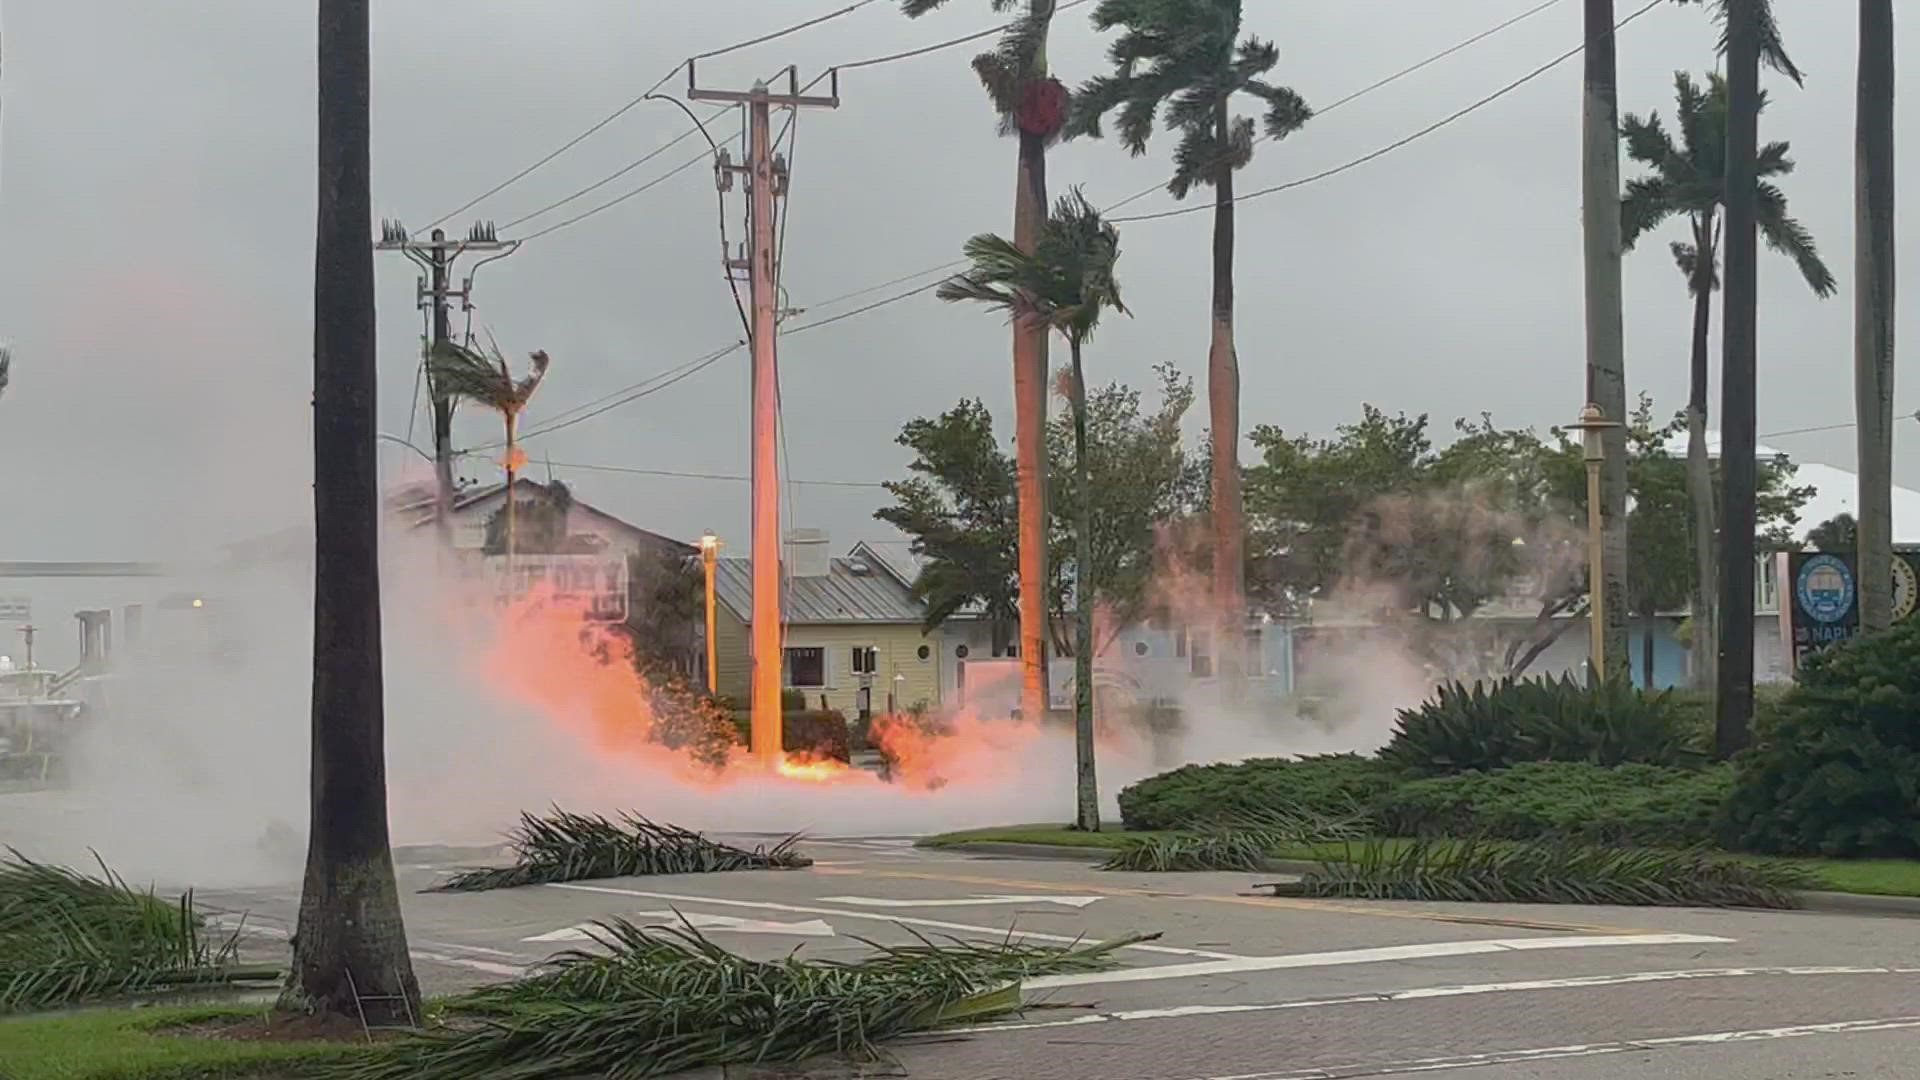 Power lines spark and threaten to cause fires in Naples, Florida.